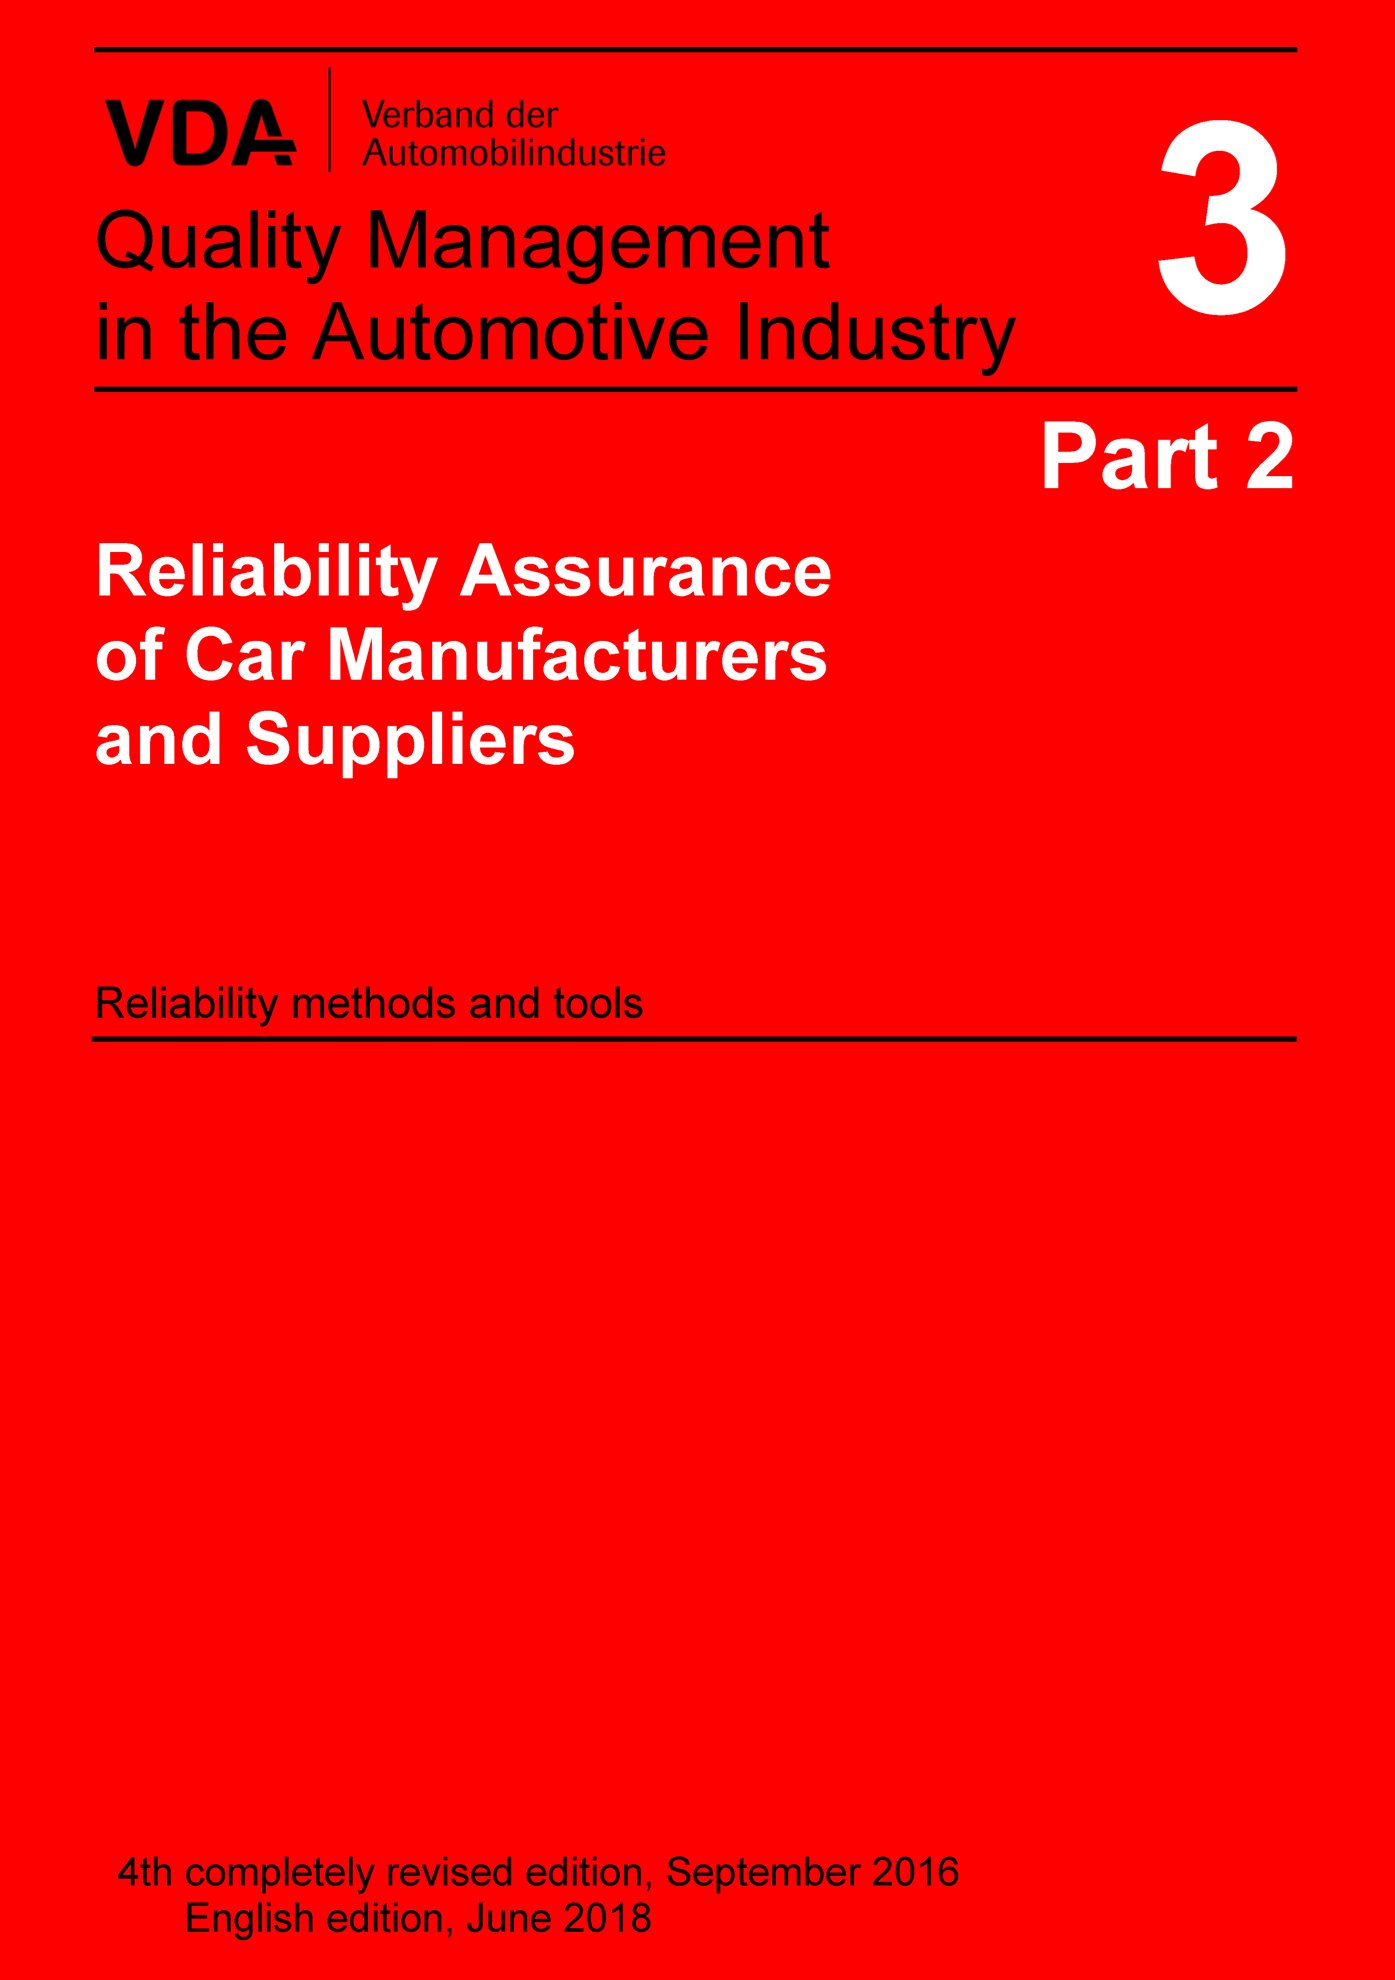 Publikation  VDA Volume 3 Part 2, 4th completely revised edition 2016 Reliability Assurance of Car Manufacturers and Suppliers 
 Reliability methods and tools 1.1.2016 Ansicht